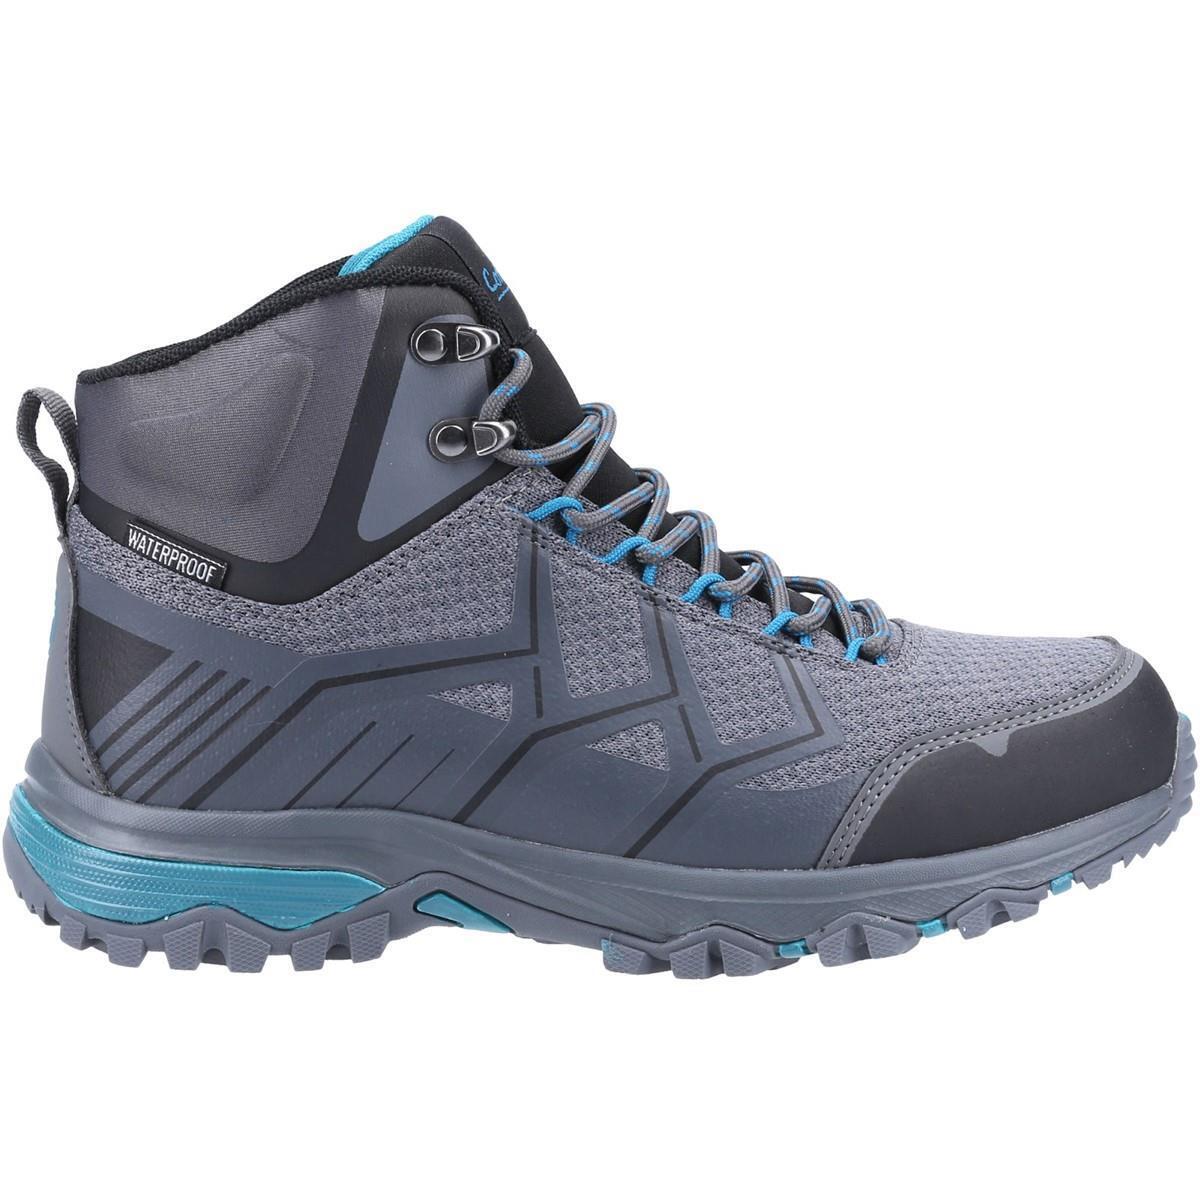 Hiking Boots Womens/ladies Cotswold Wychwood - gris-azul - 